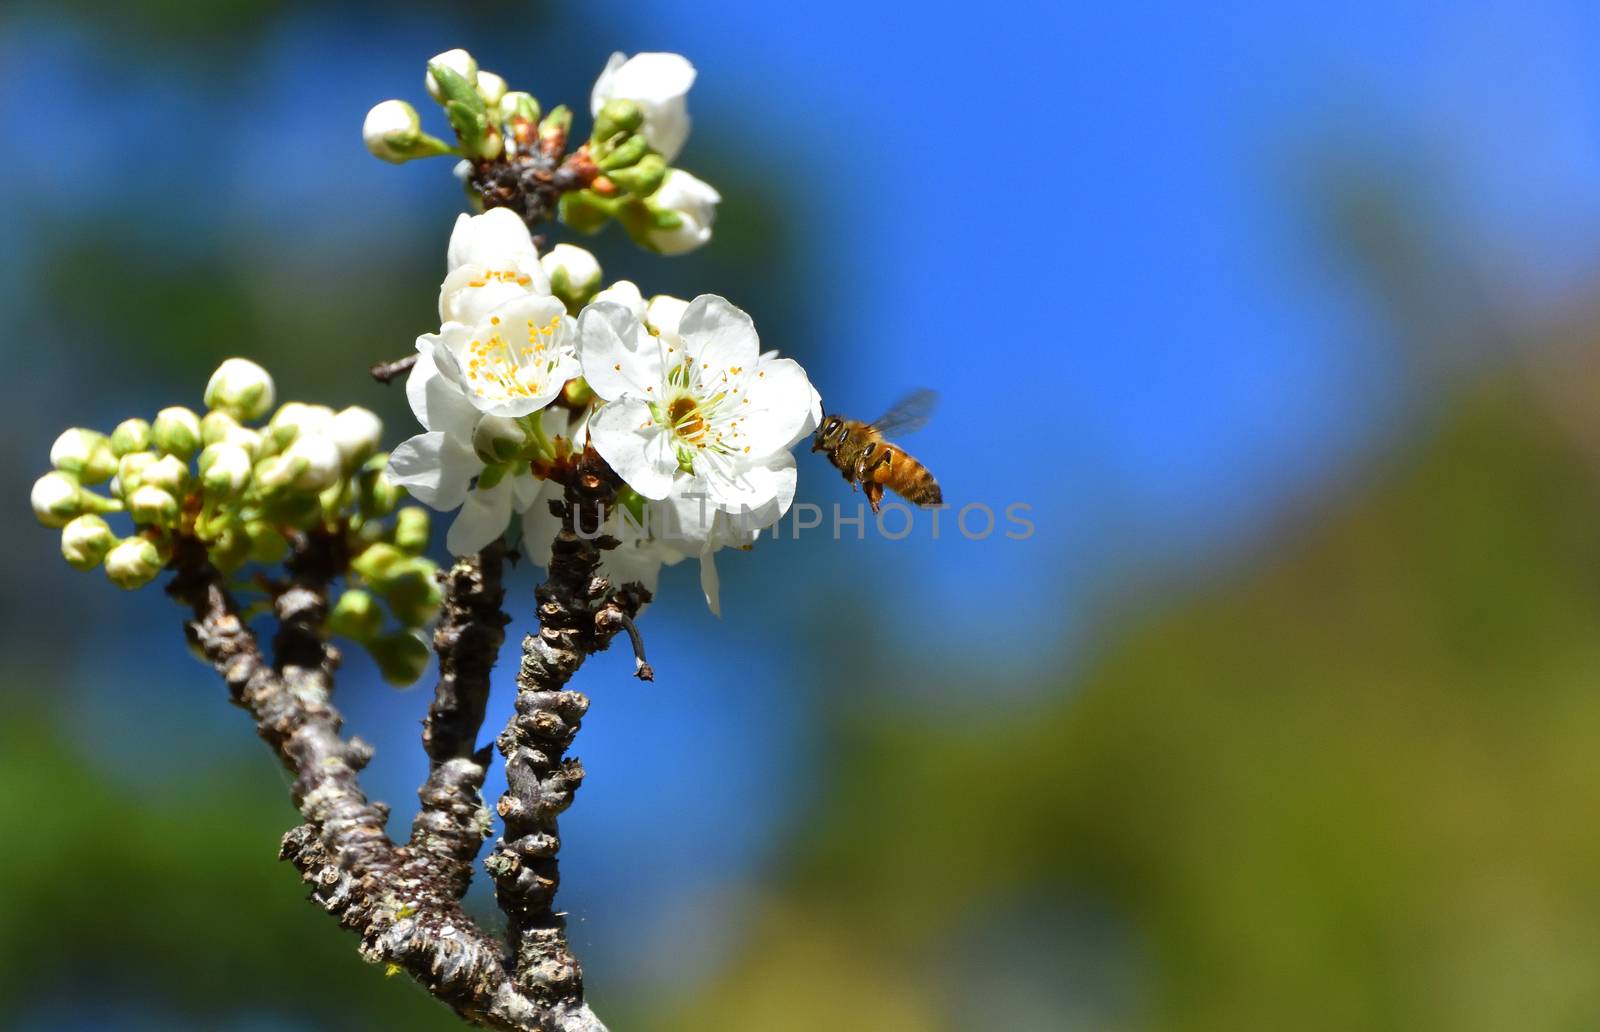 Bees pollinating white fruit flowers